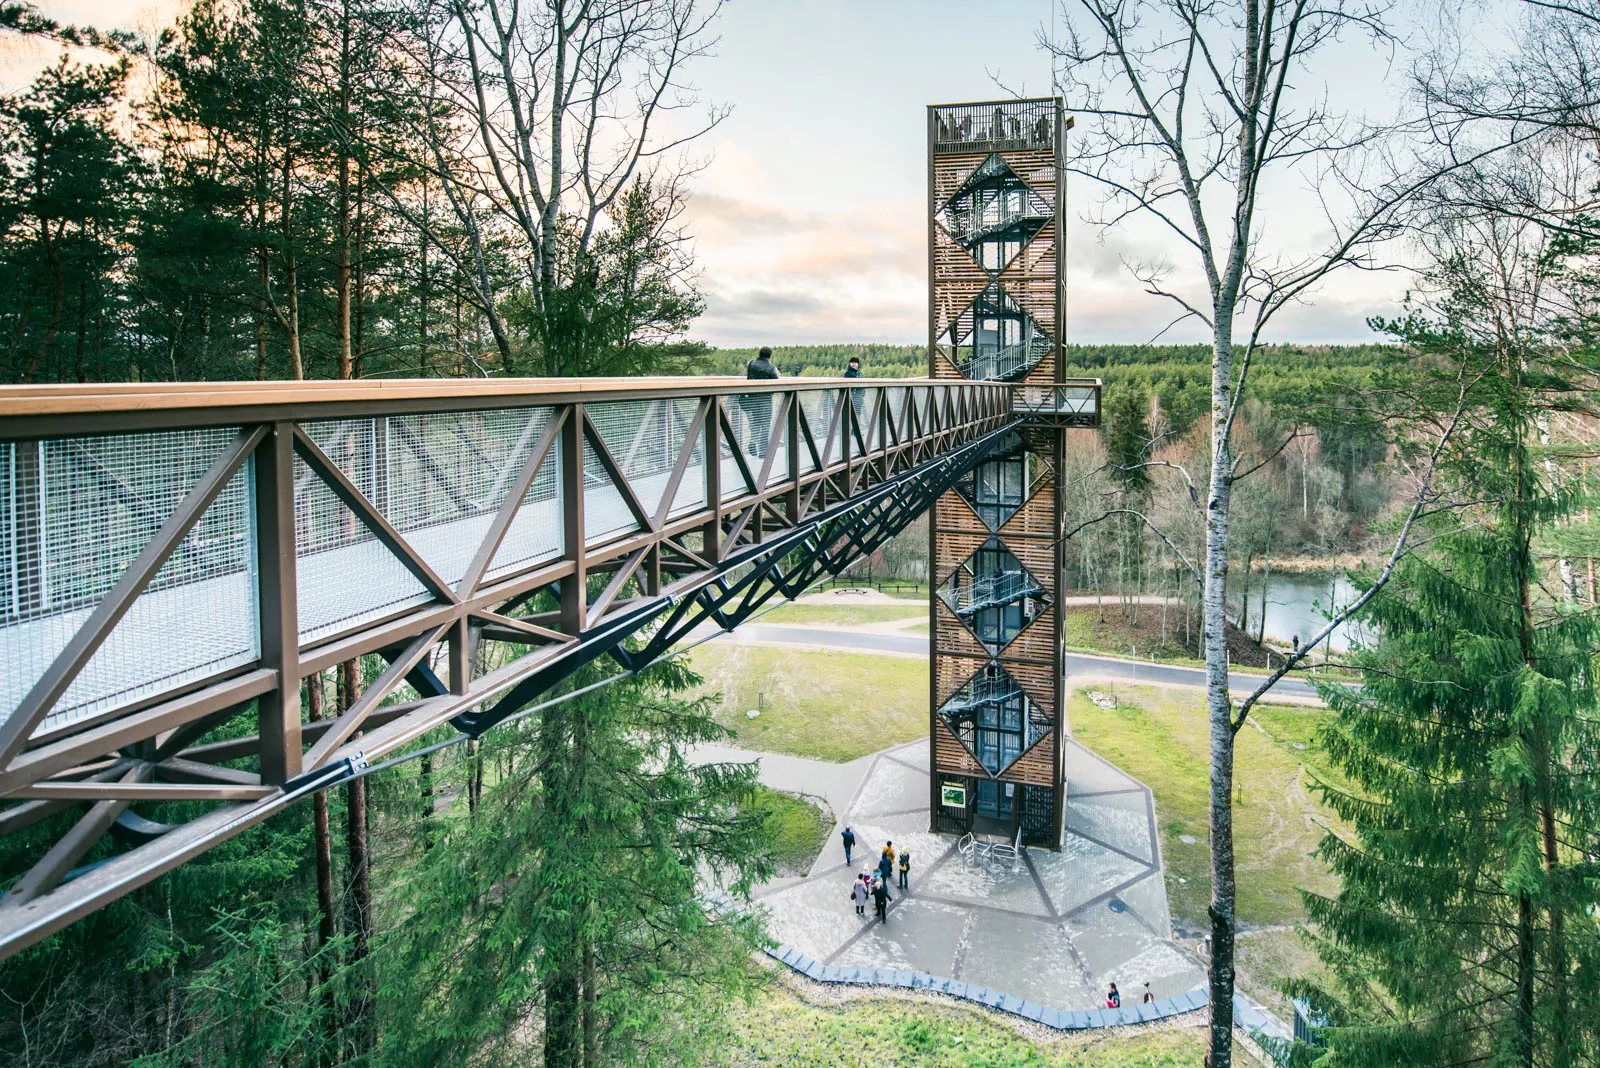 Treetop Walking Path in Lithuania, Europe | Architecture,Parks - Rated 3.9